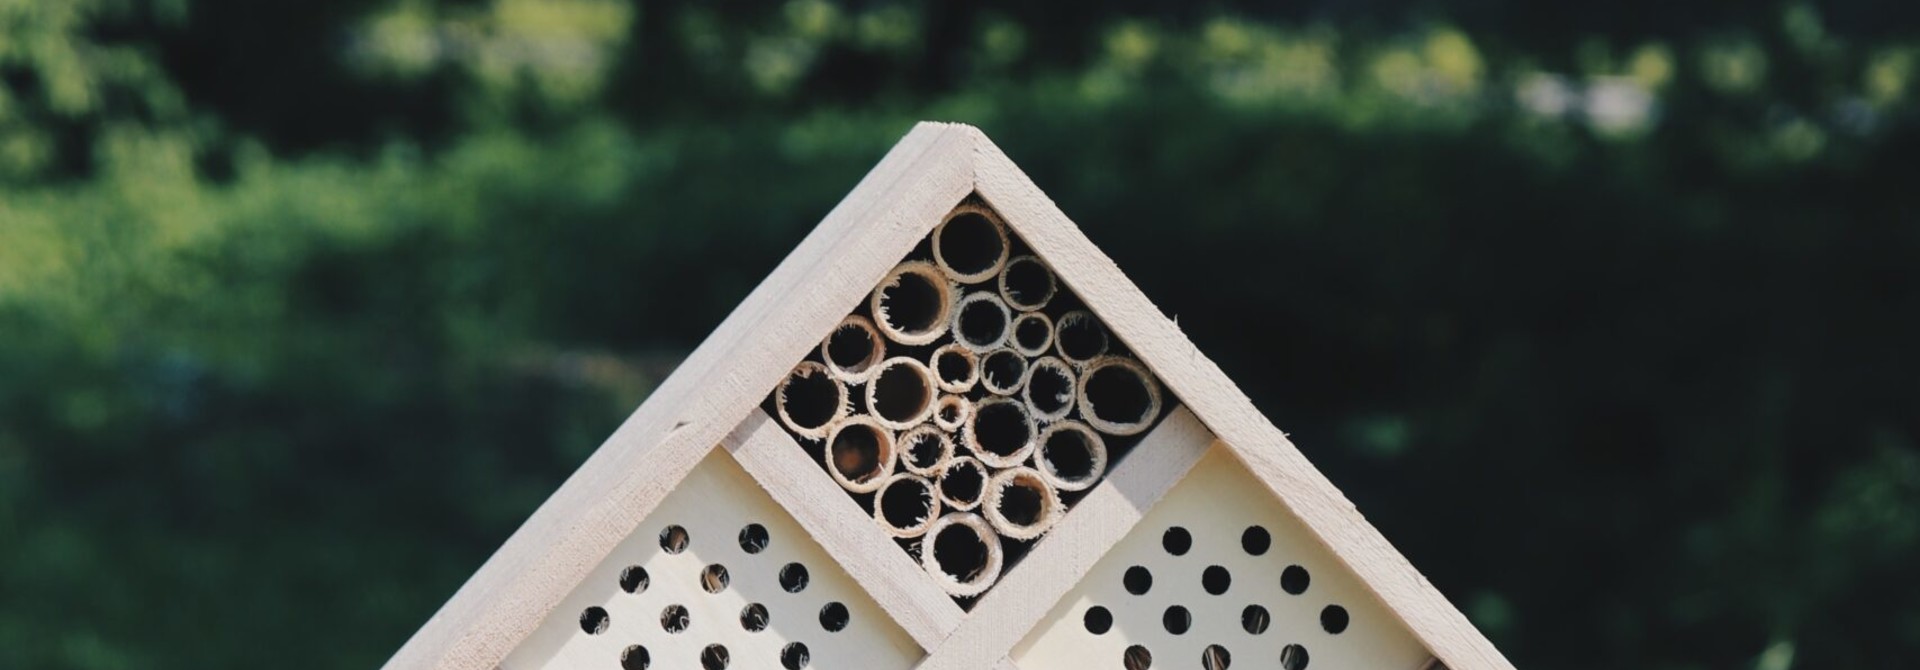 Bug hotel for insects (medium)